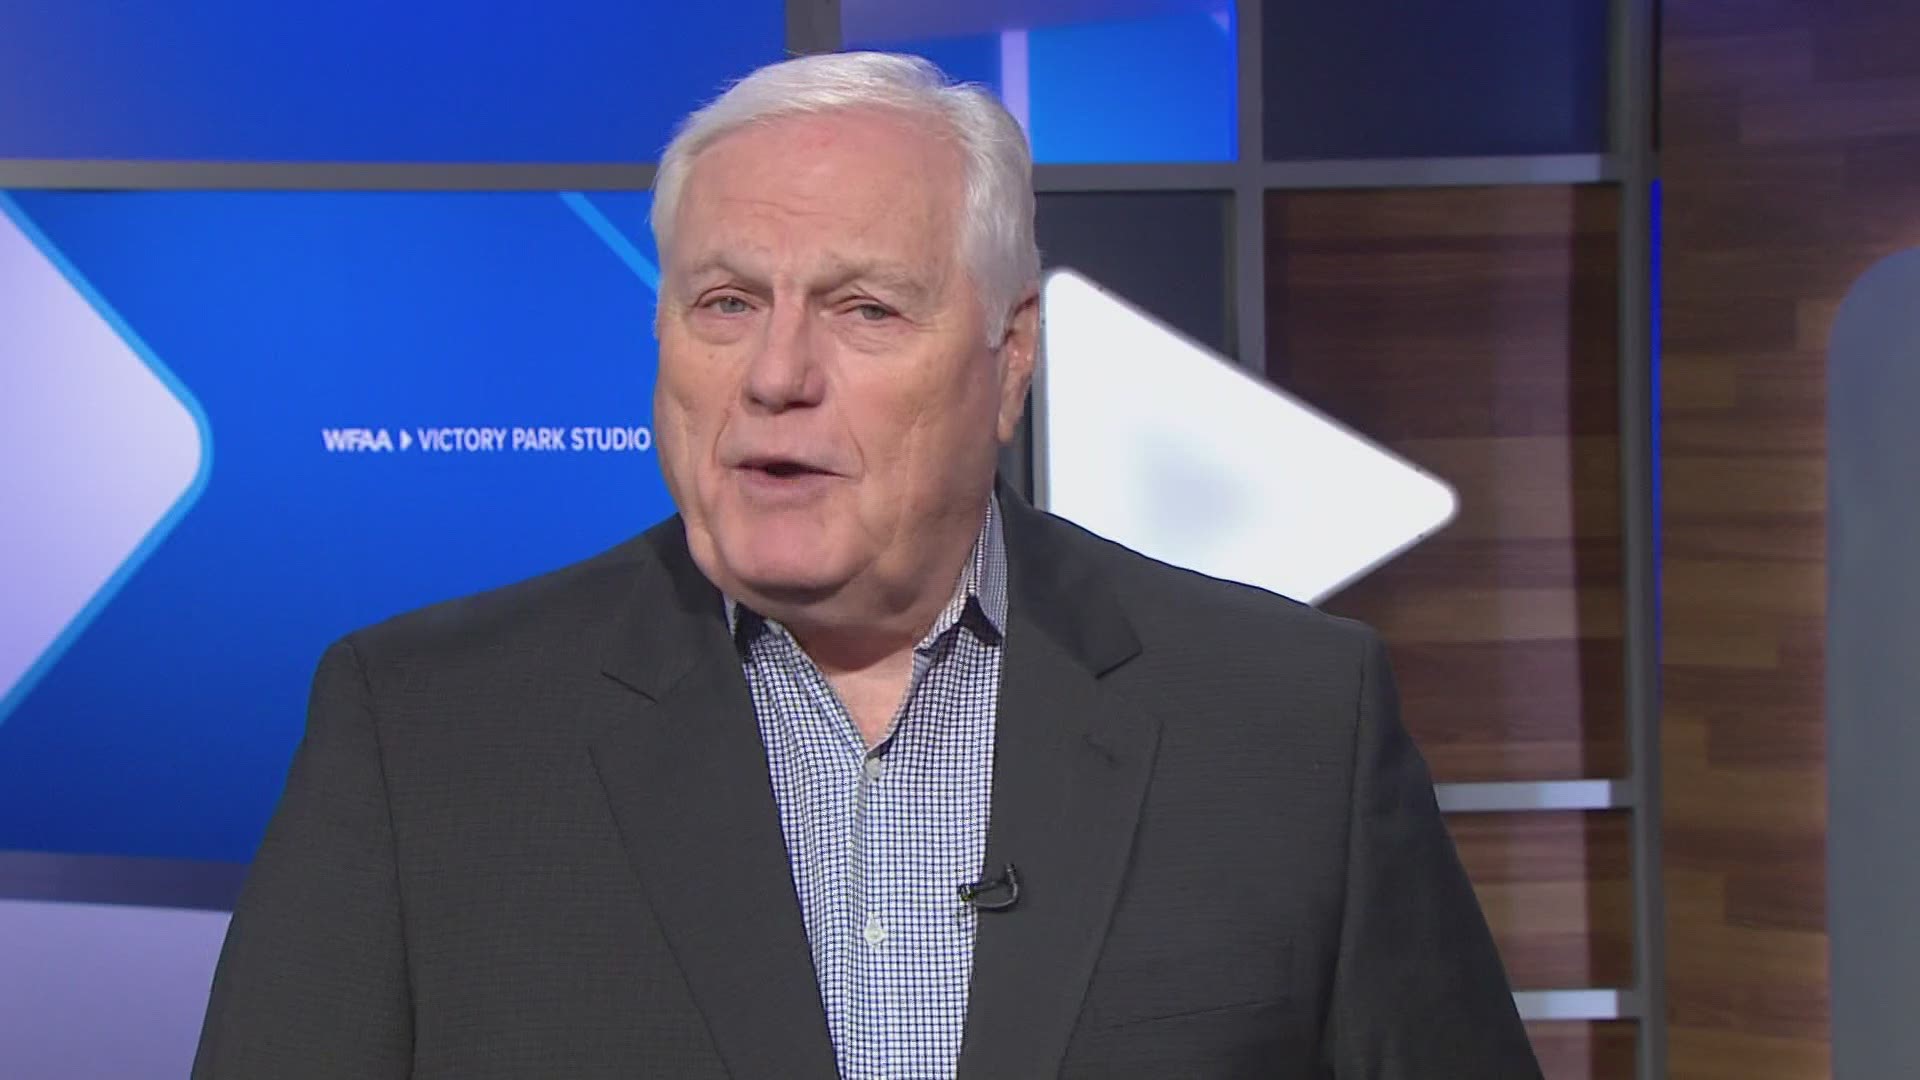 Here are Dale Hansen's thoughts on Derek Chauvin's fate and taking a knee.